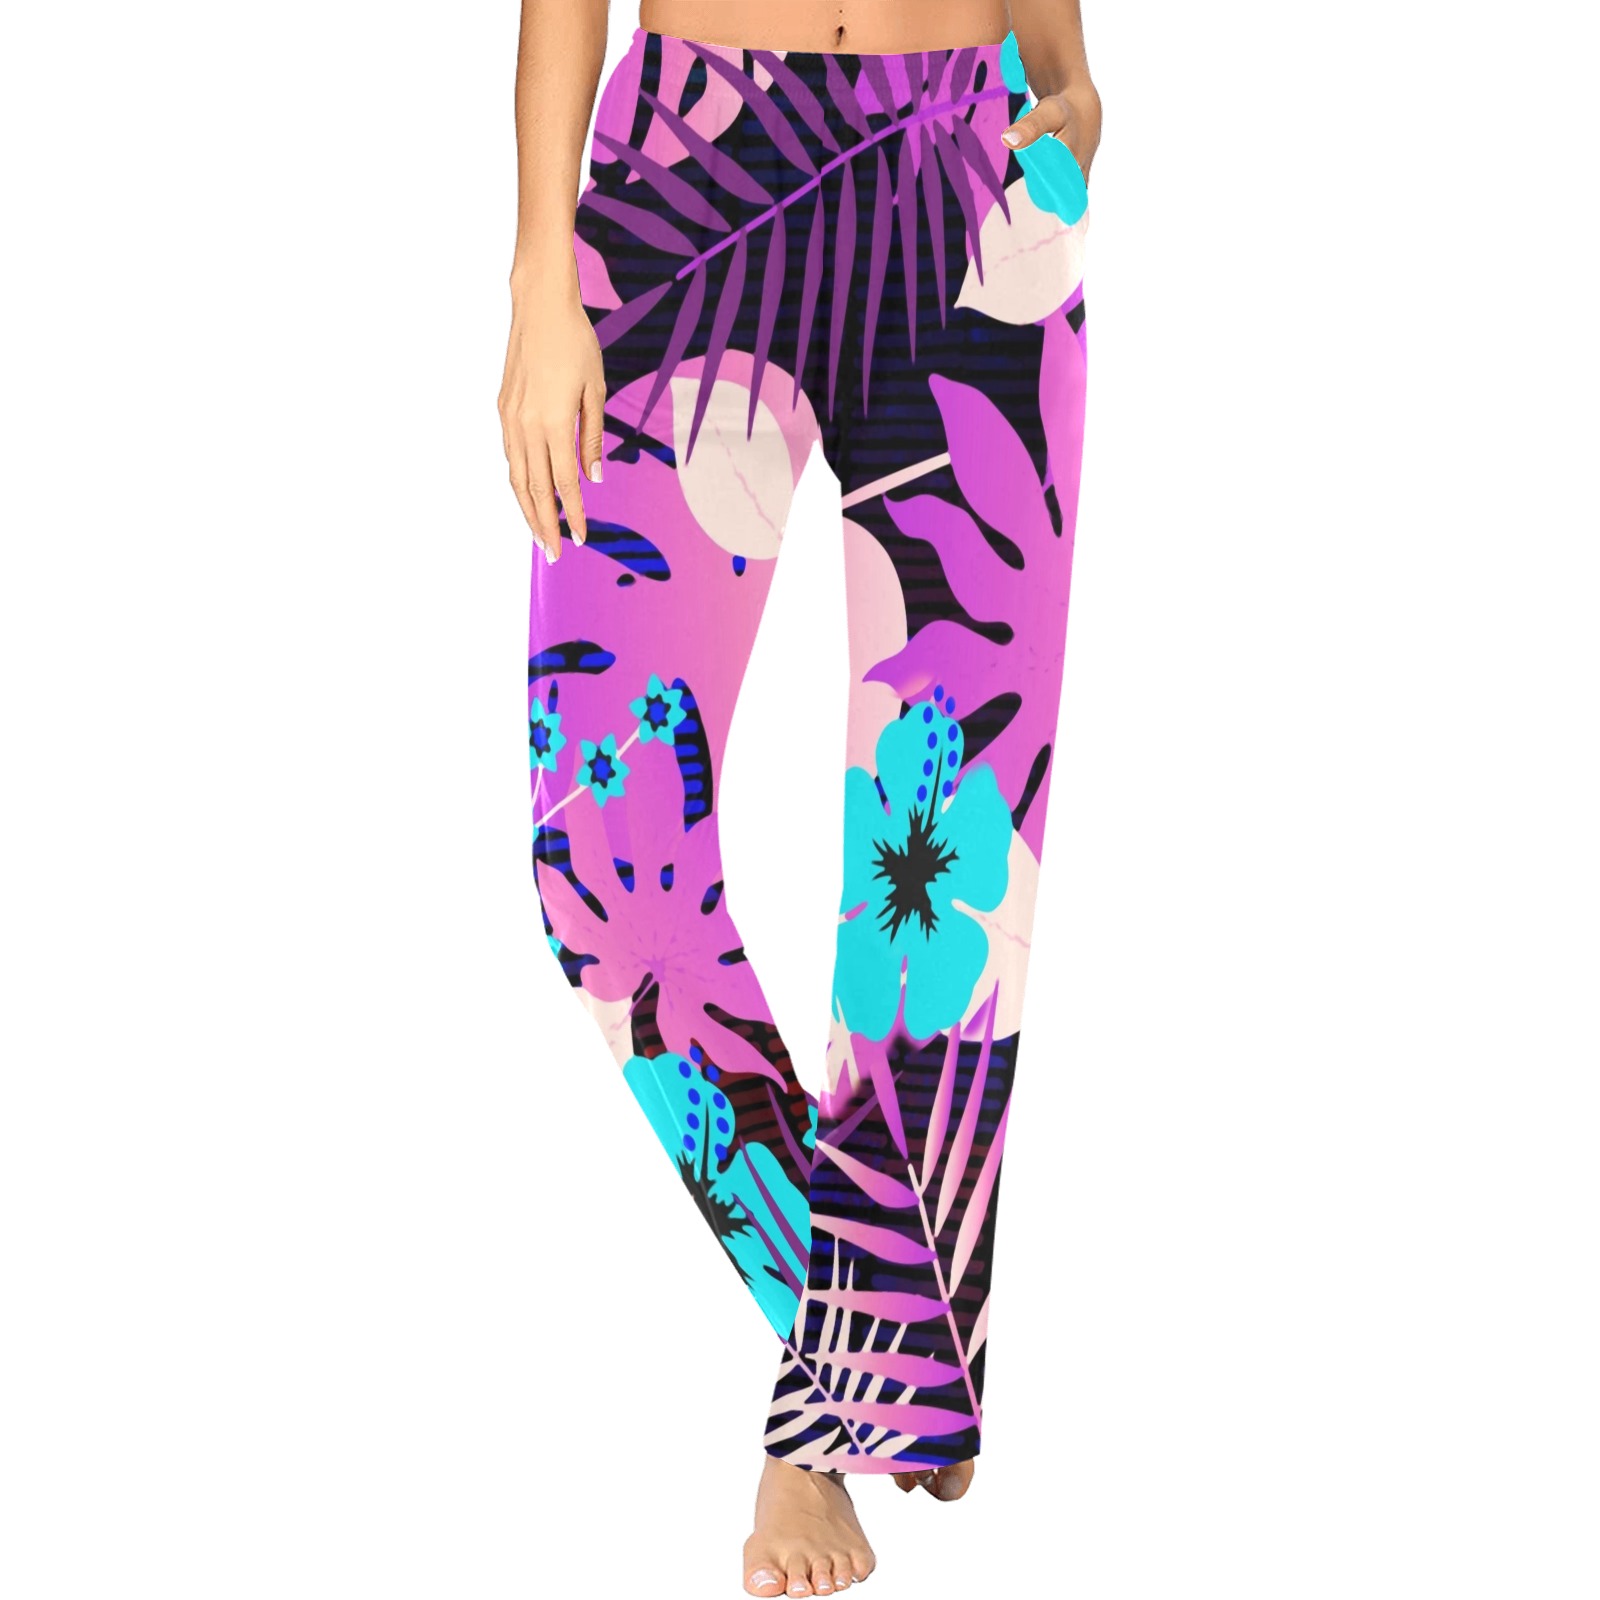 GROOVY FUNK THING FLORAL PURPLE Women's Pajama Trousers